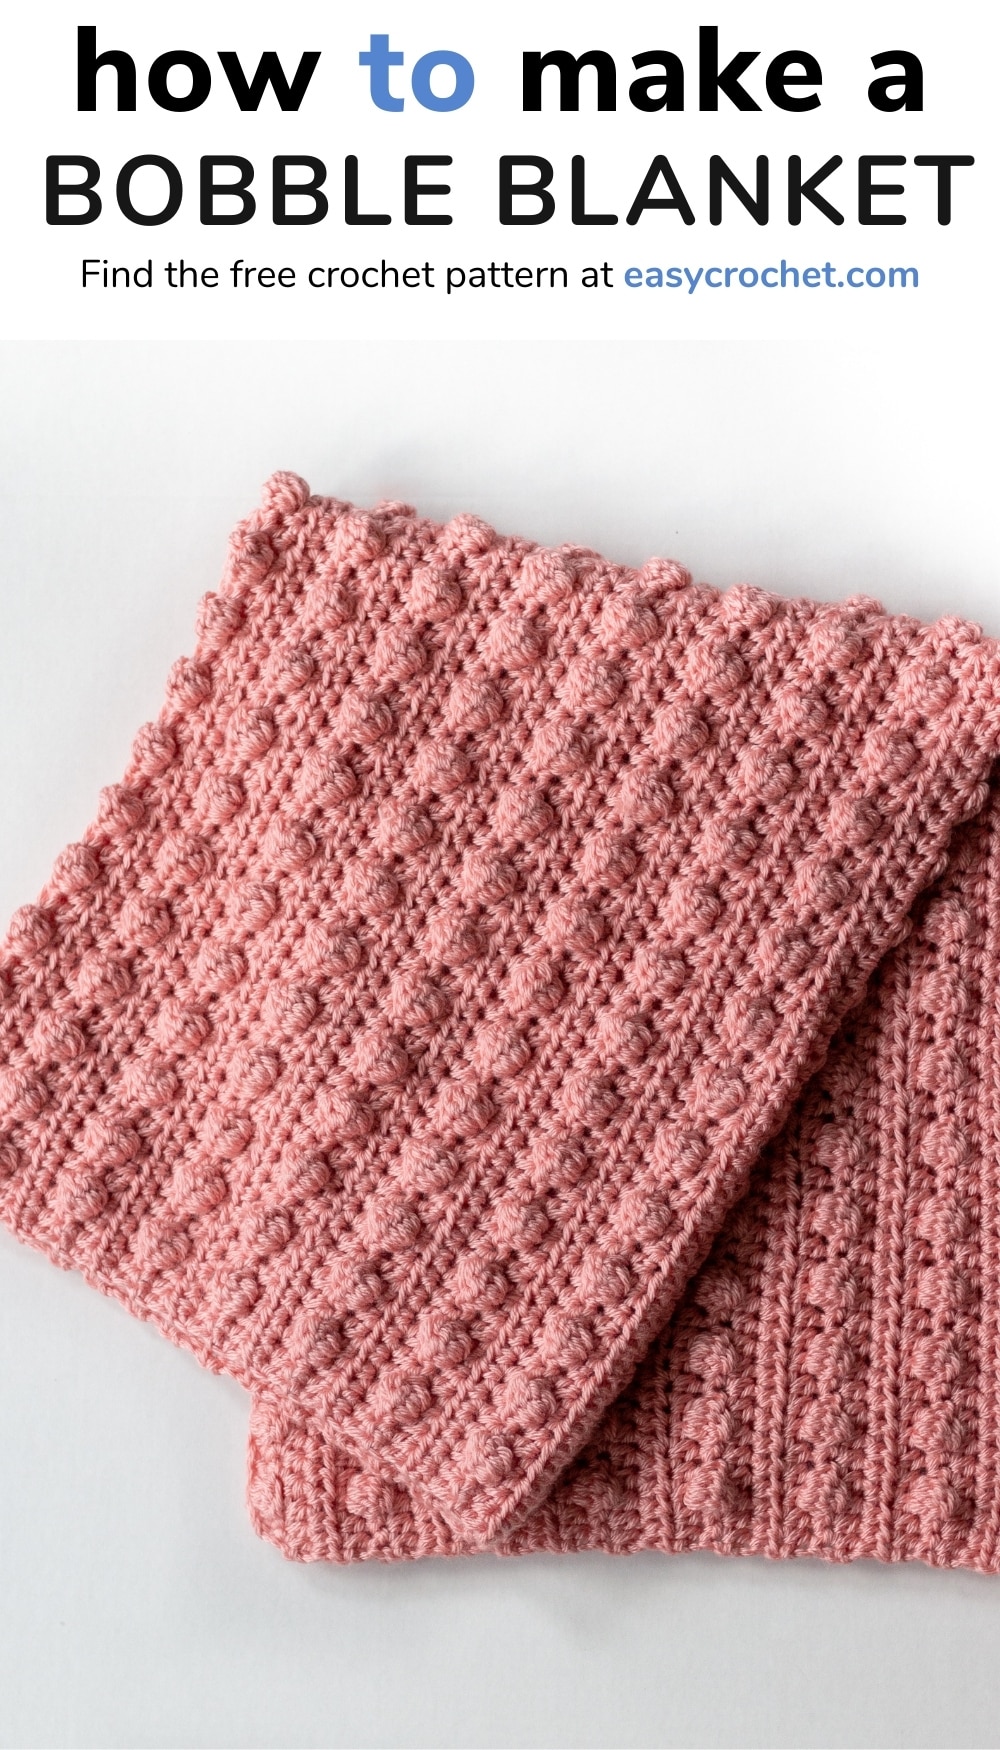 Learn how to crochet a bobble stitch blanket in EIGHT different blanket sizes! Free pattern found on easycrochet.com